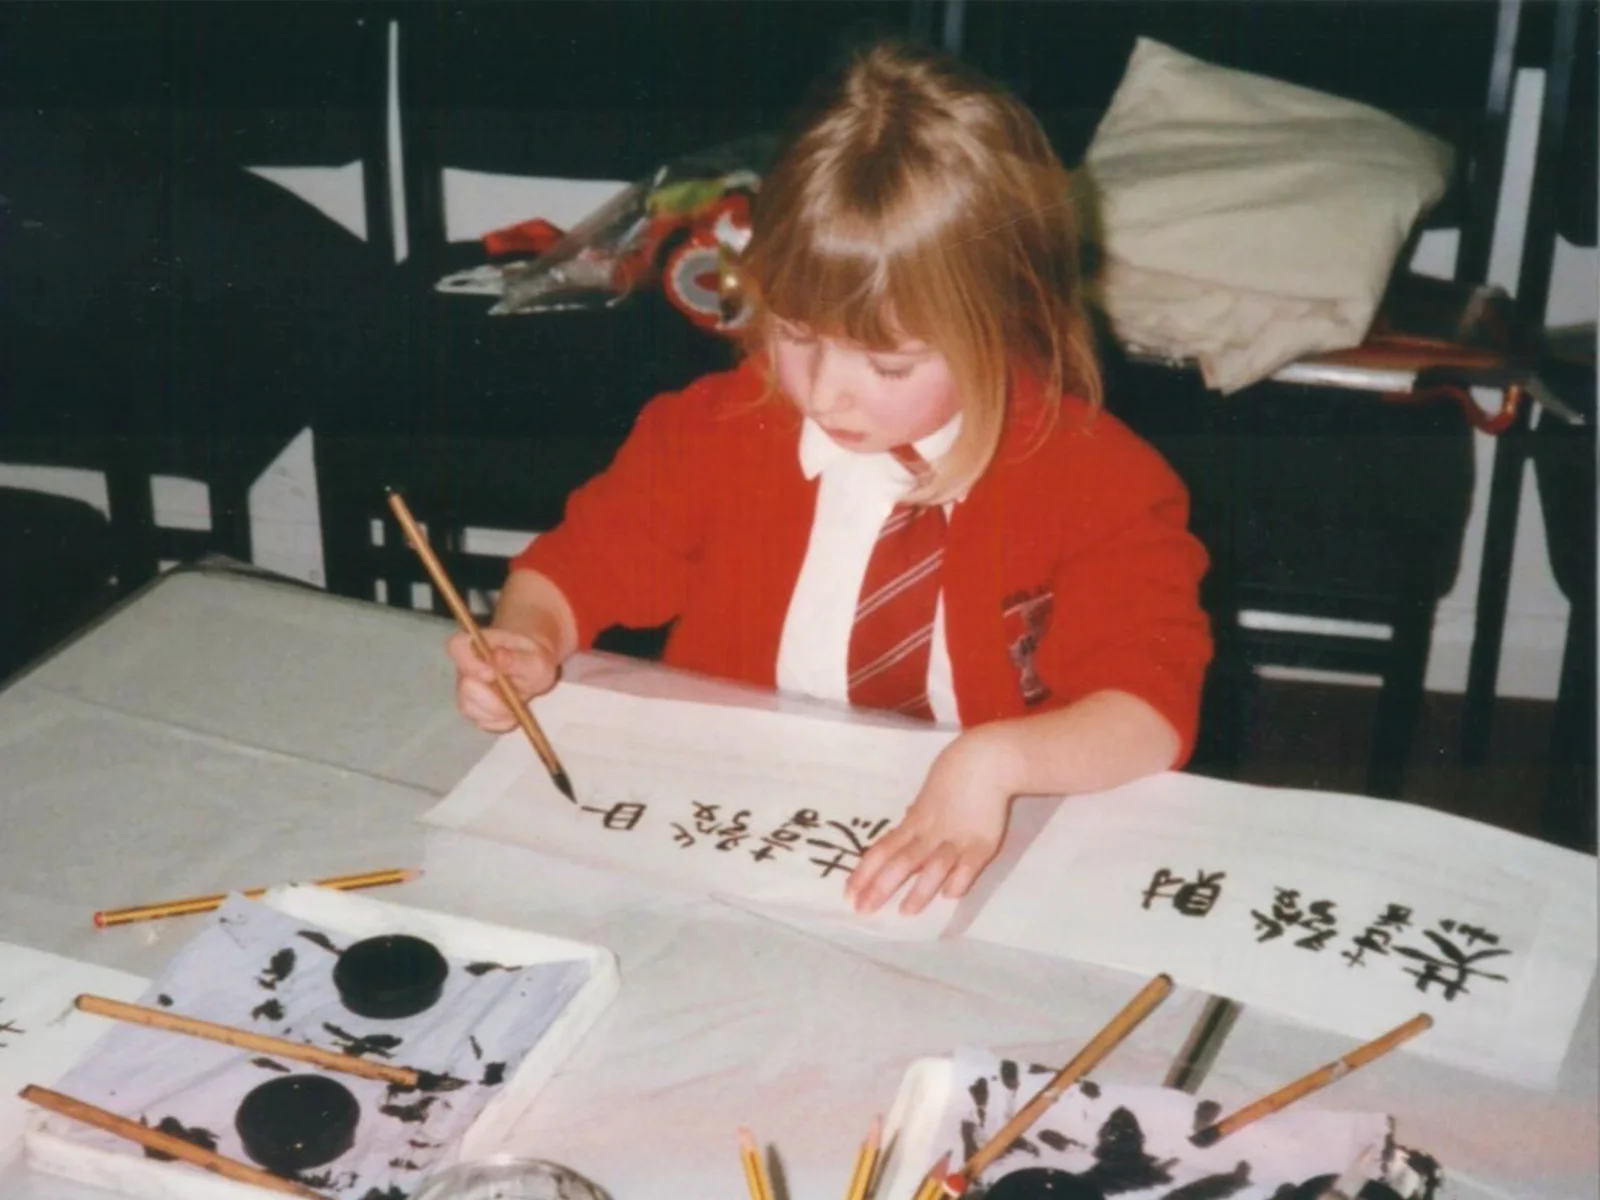 A young Clare working on a school project.